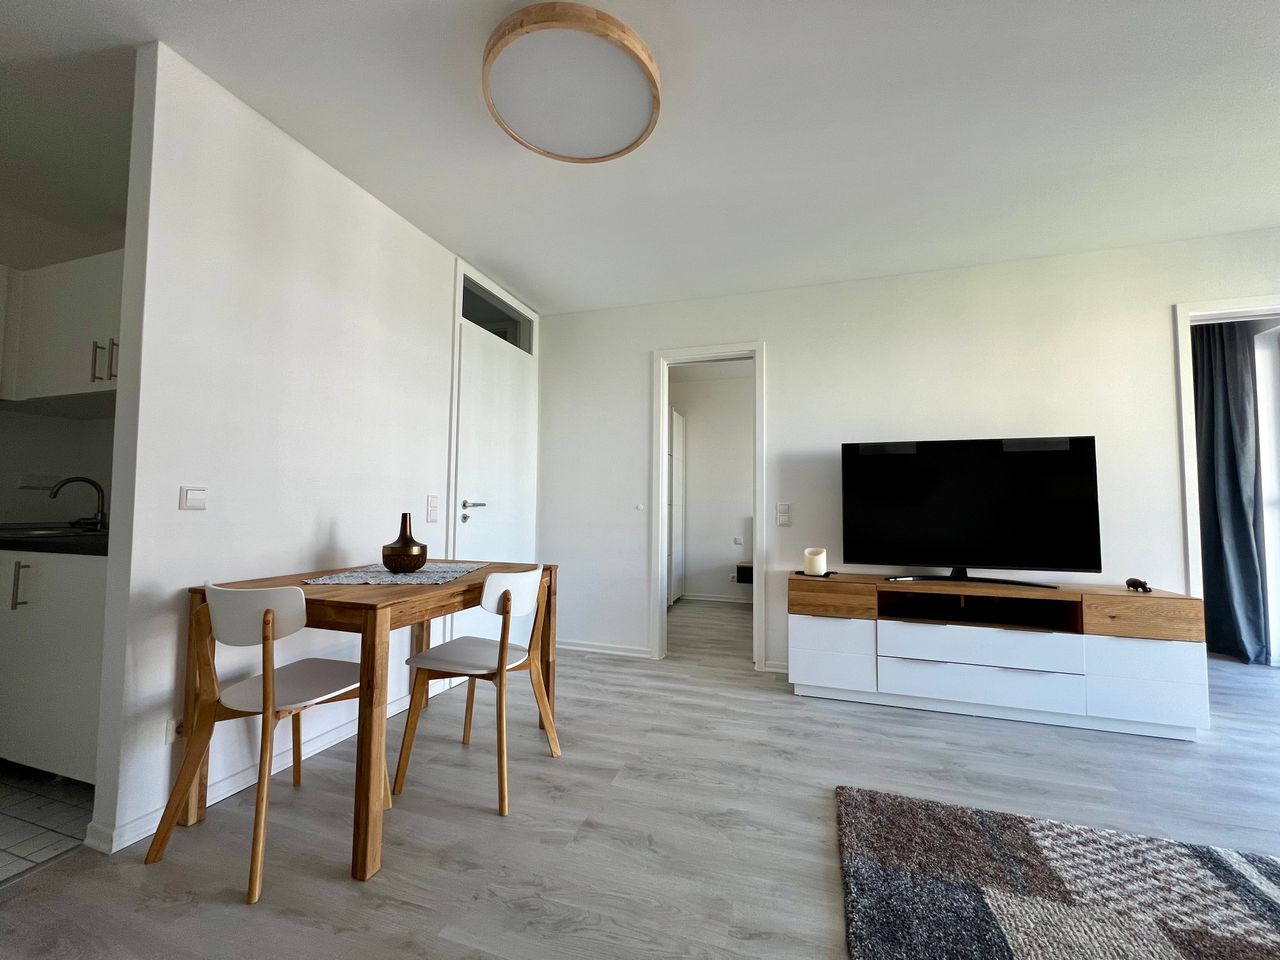 Modern and bright new apartment in the heart of Berlin-Mitte with balcony